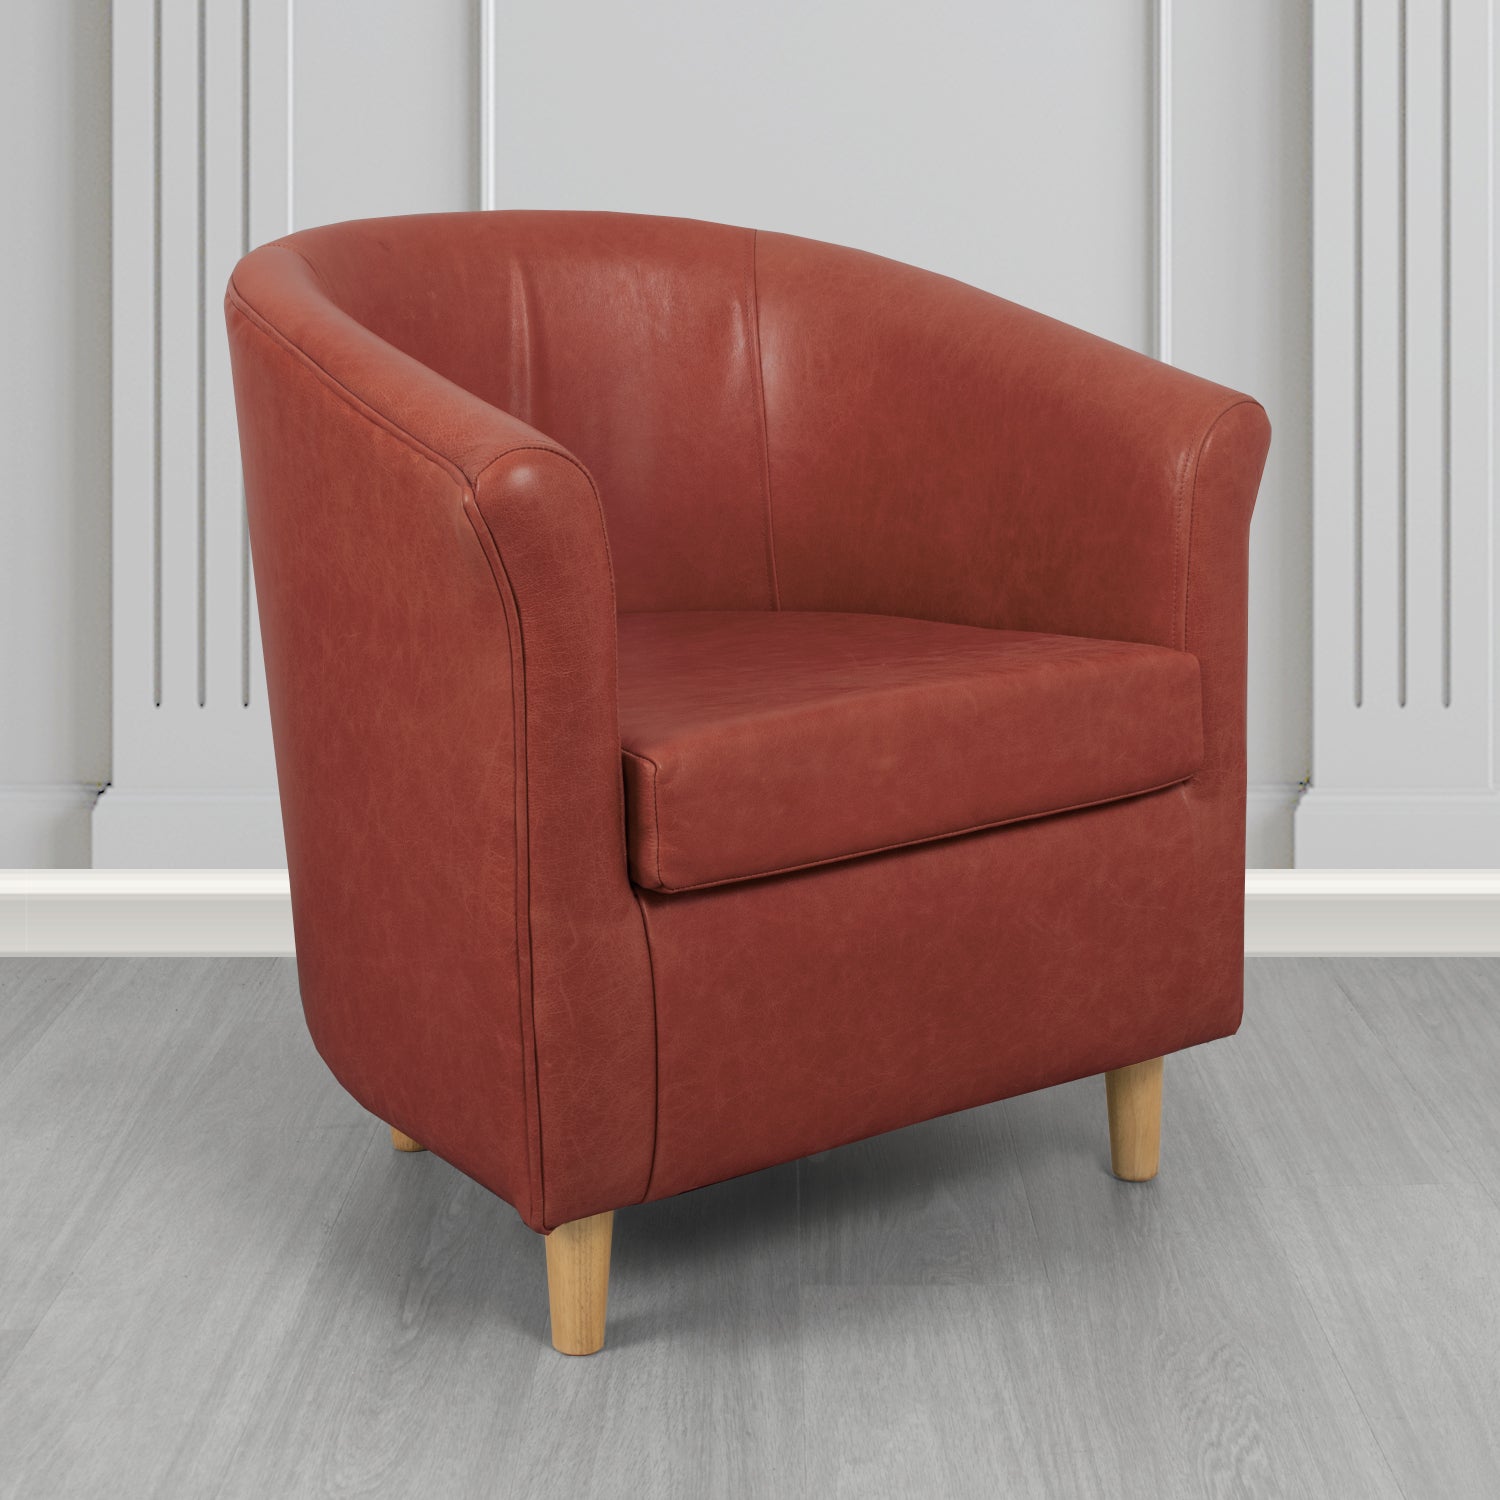 Tuscany Tub Chair in Crib 5 Old English Chestnut Genuine Leather - The Tub Chair Shop